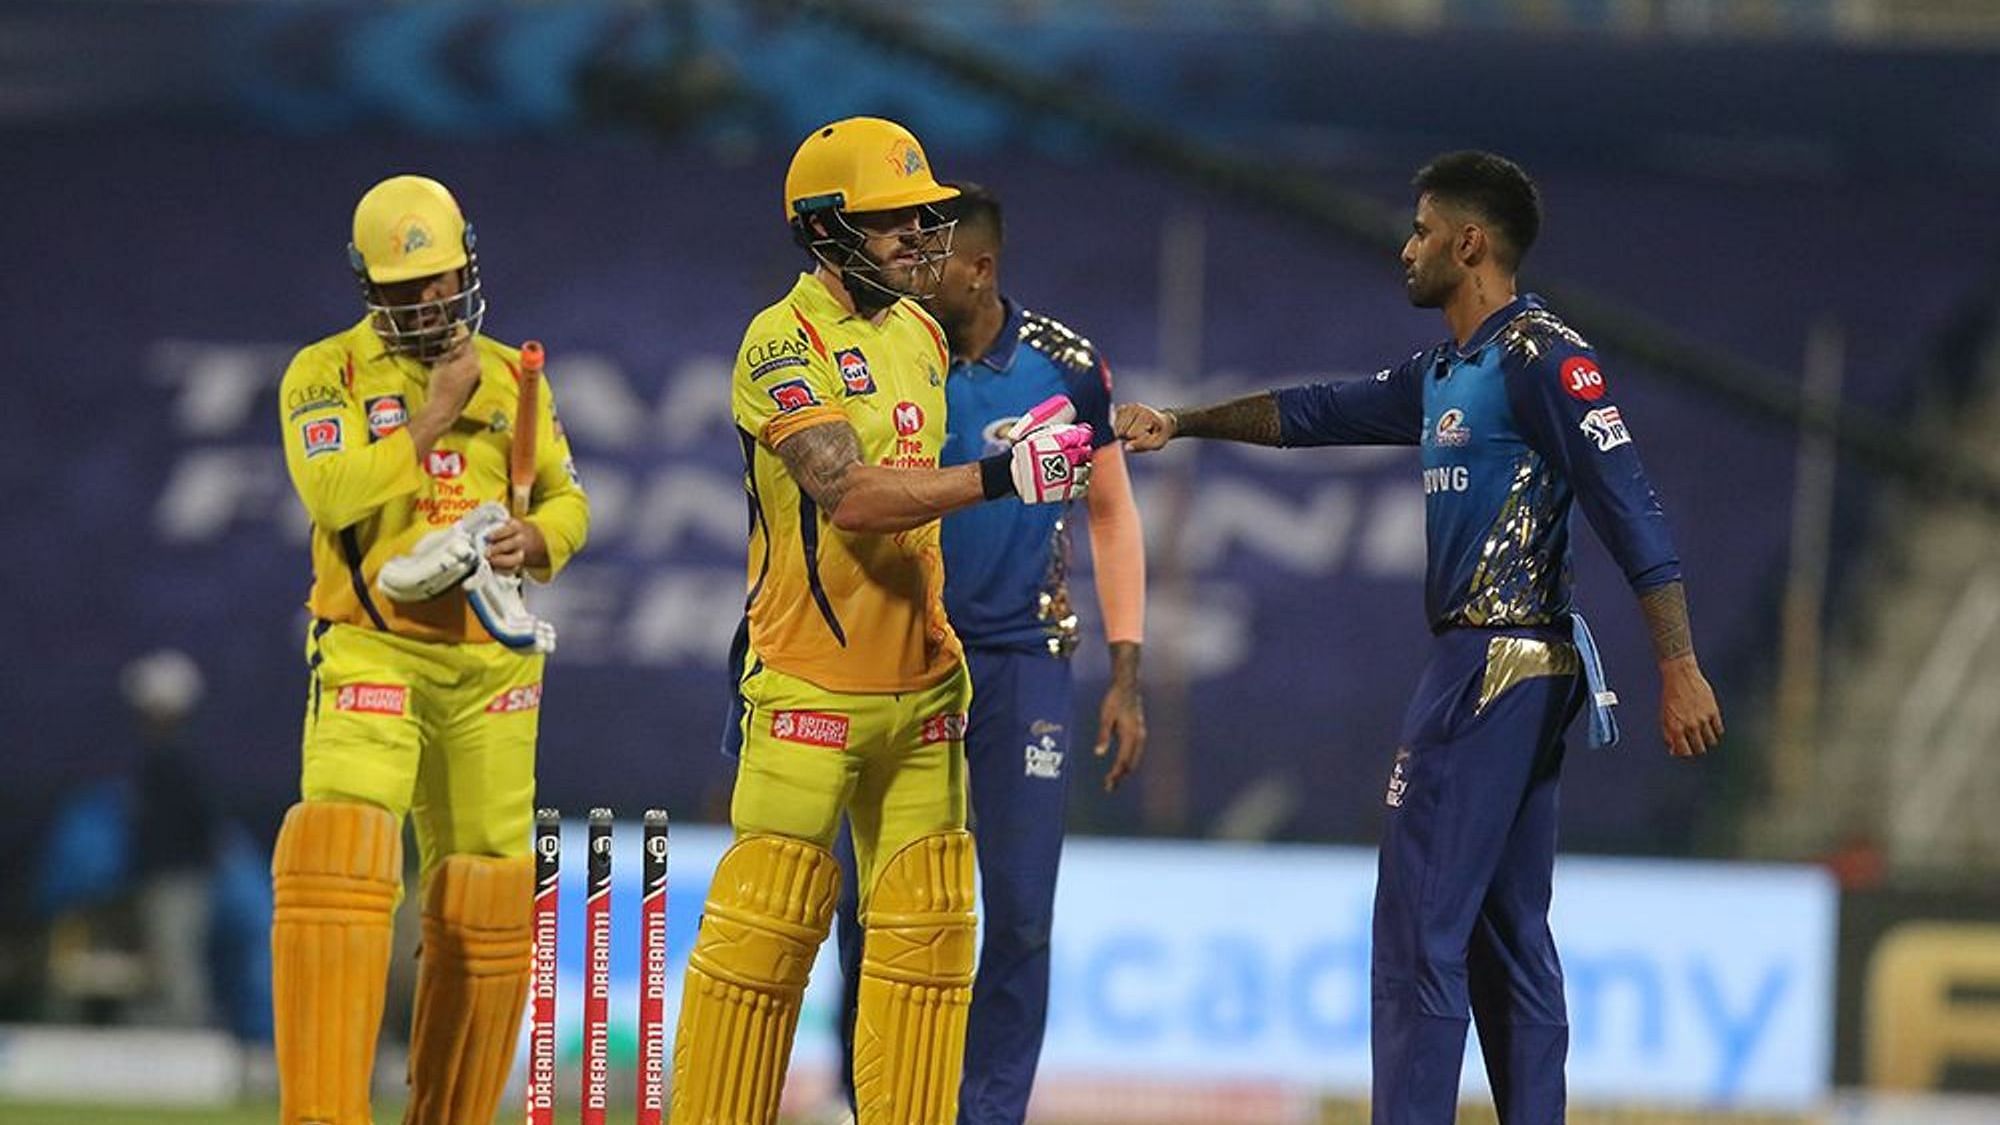 Chennai Super Kings won the first game of the IPL 2020, after chasing 163 runs in 19.2 overs against the Mumbai Indians